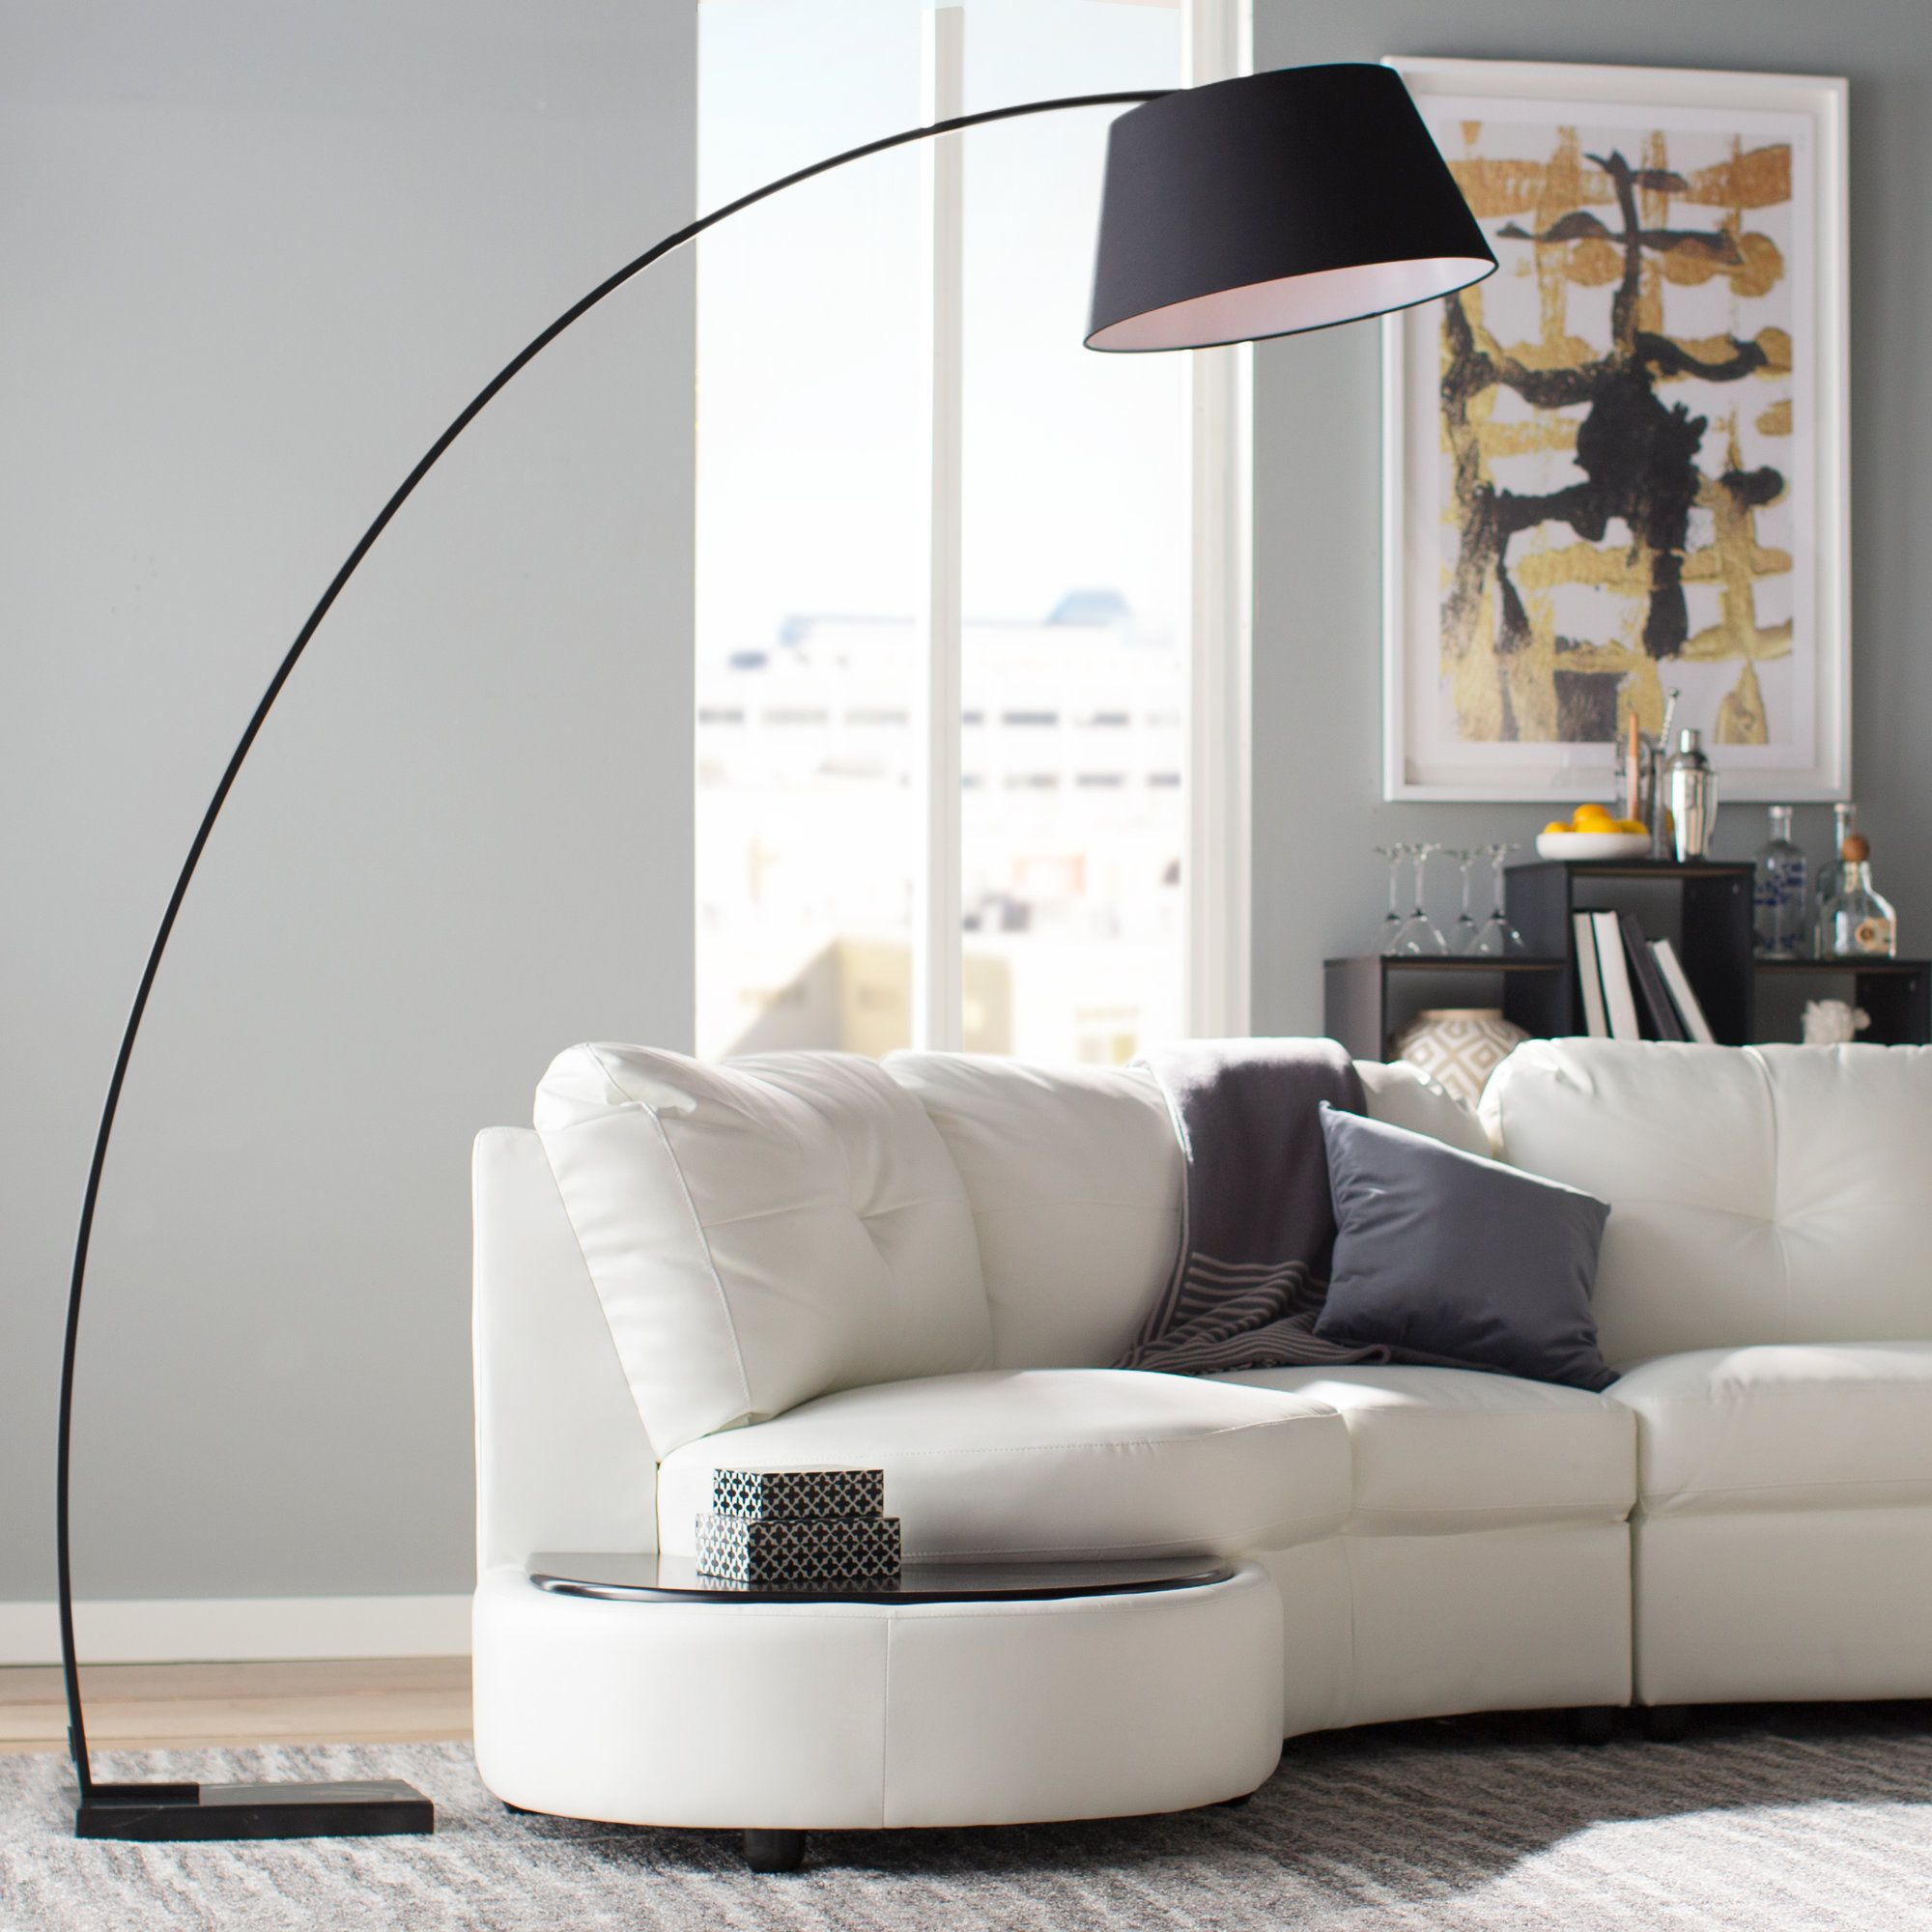 Blitar 77 Arched Floor Lamp Products intended for size 2000 X 2000